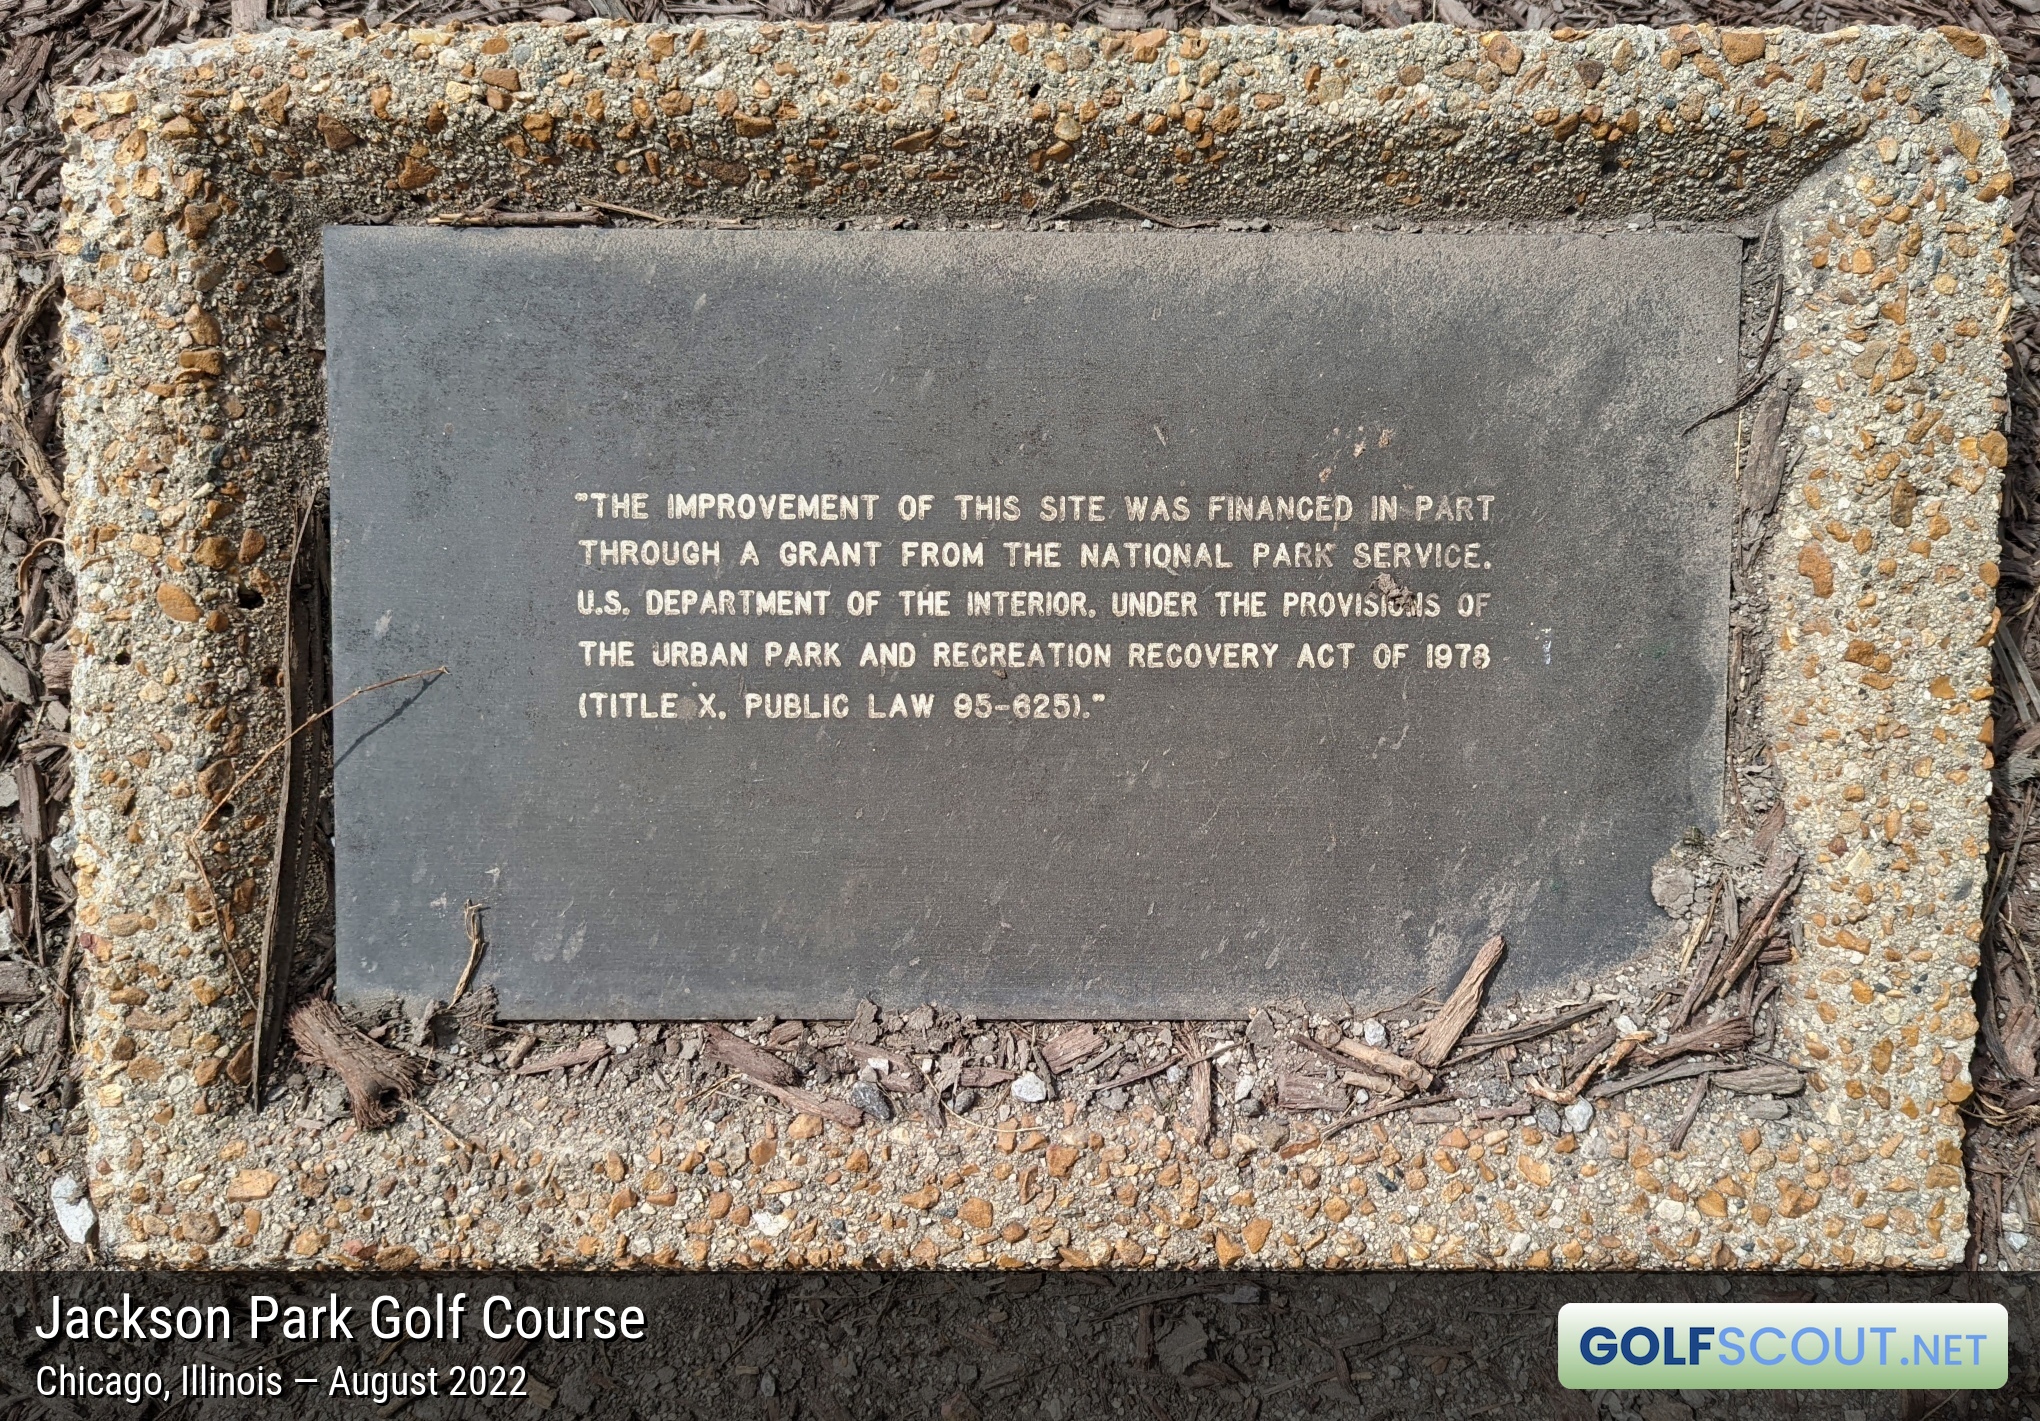 Miscellaneous photo of Jackson Park Golf Course in Chicago, Illinois. Near the first tee, there's a brick in the ground with the following inscription: "The improvement of this site was financed in part through a grant from the National Park Service. U.S. Department of the Interior, under the provisions of the Urban Park and Recreation Recovery Act of 1978 (Title X, Public Law 95-625)"